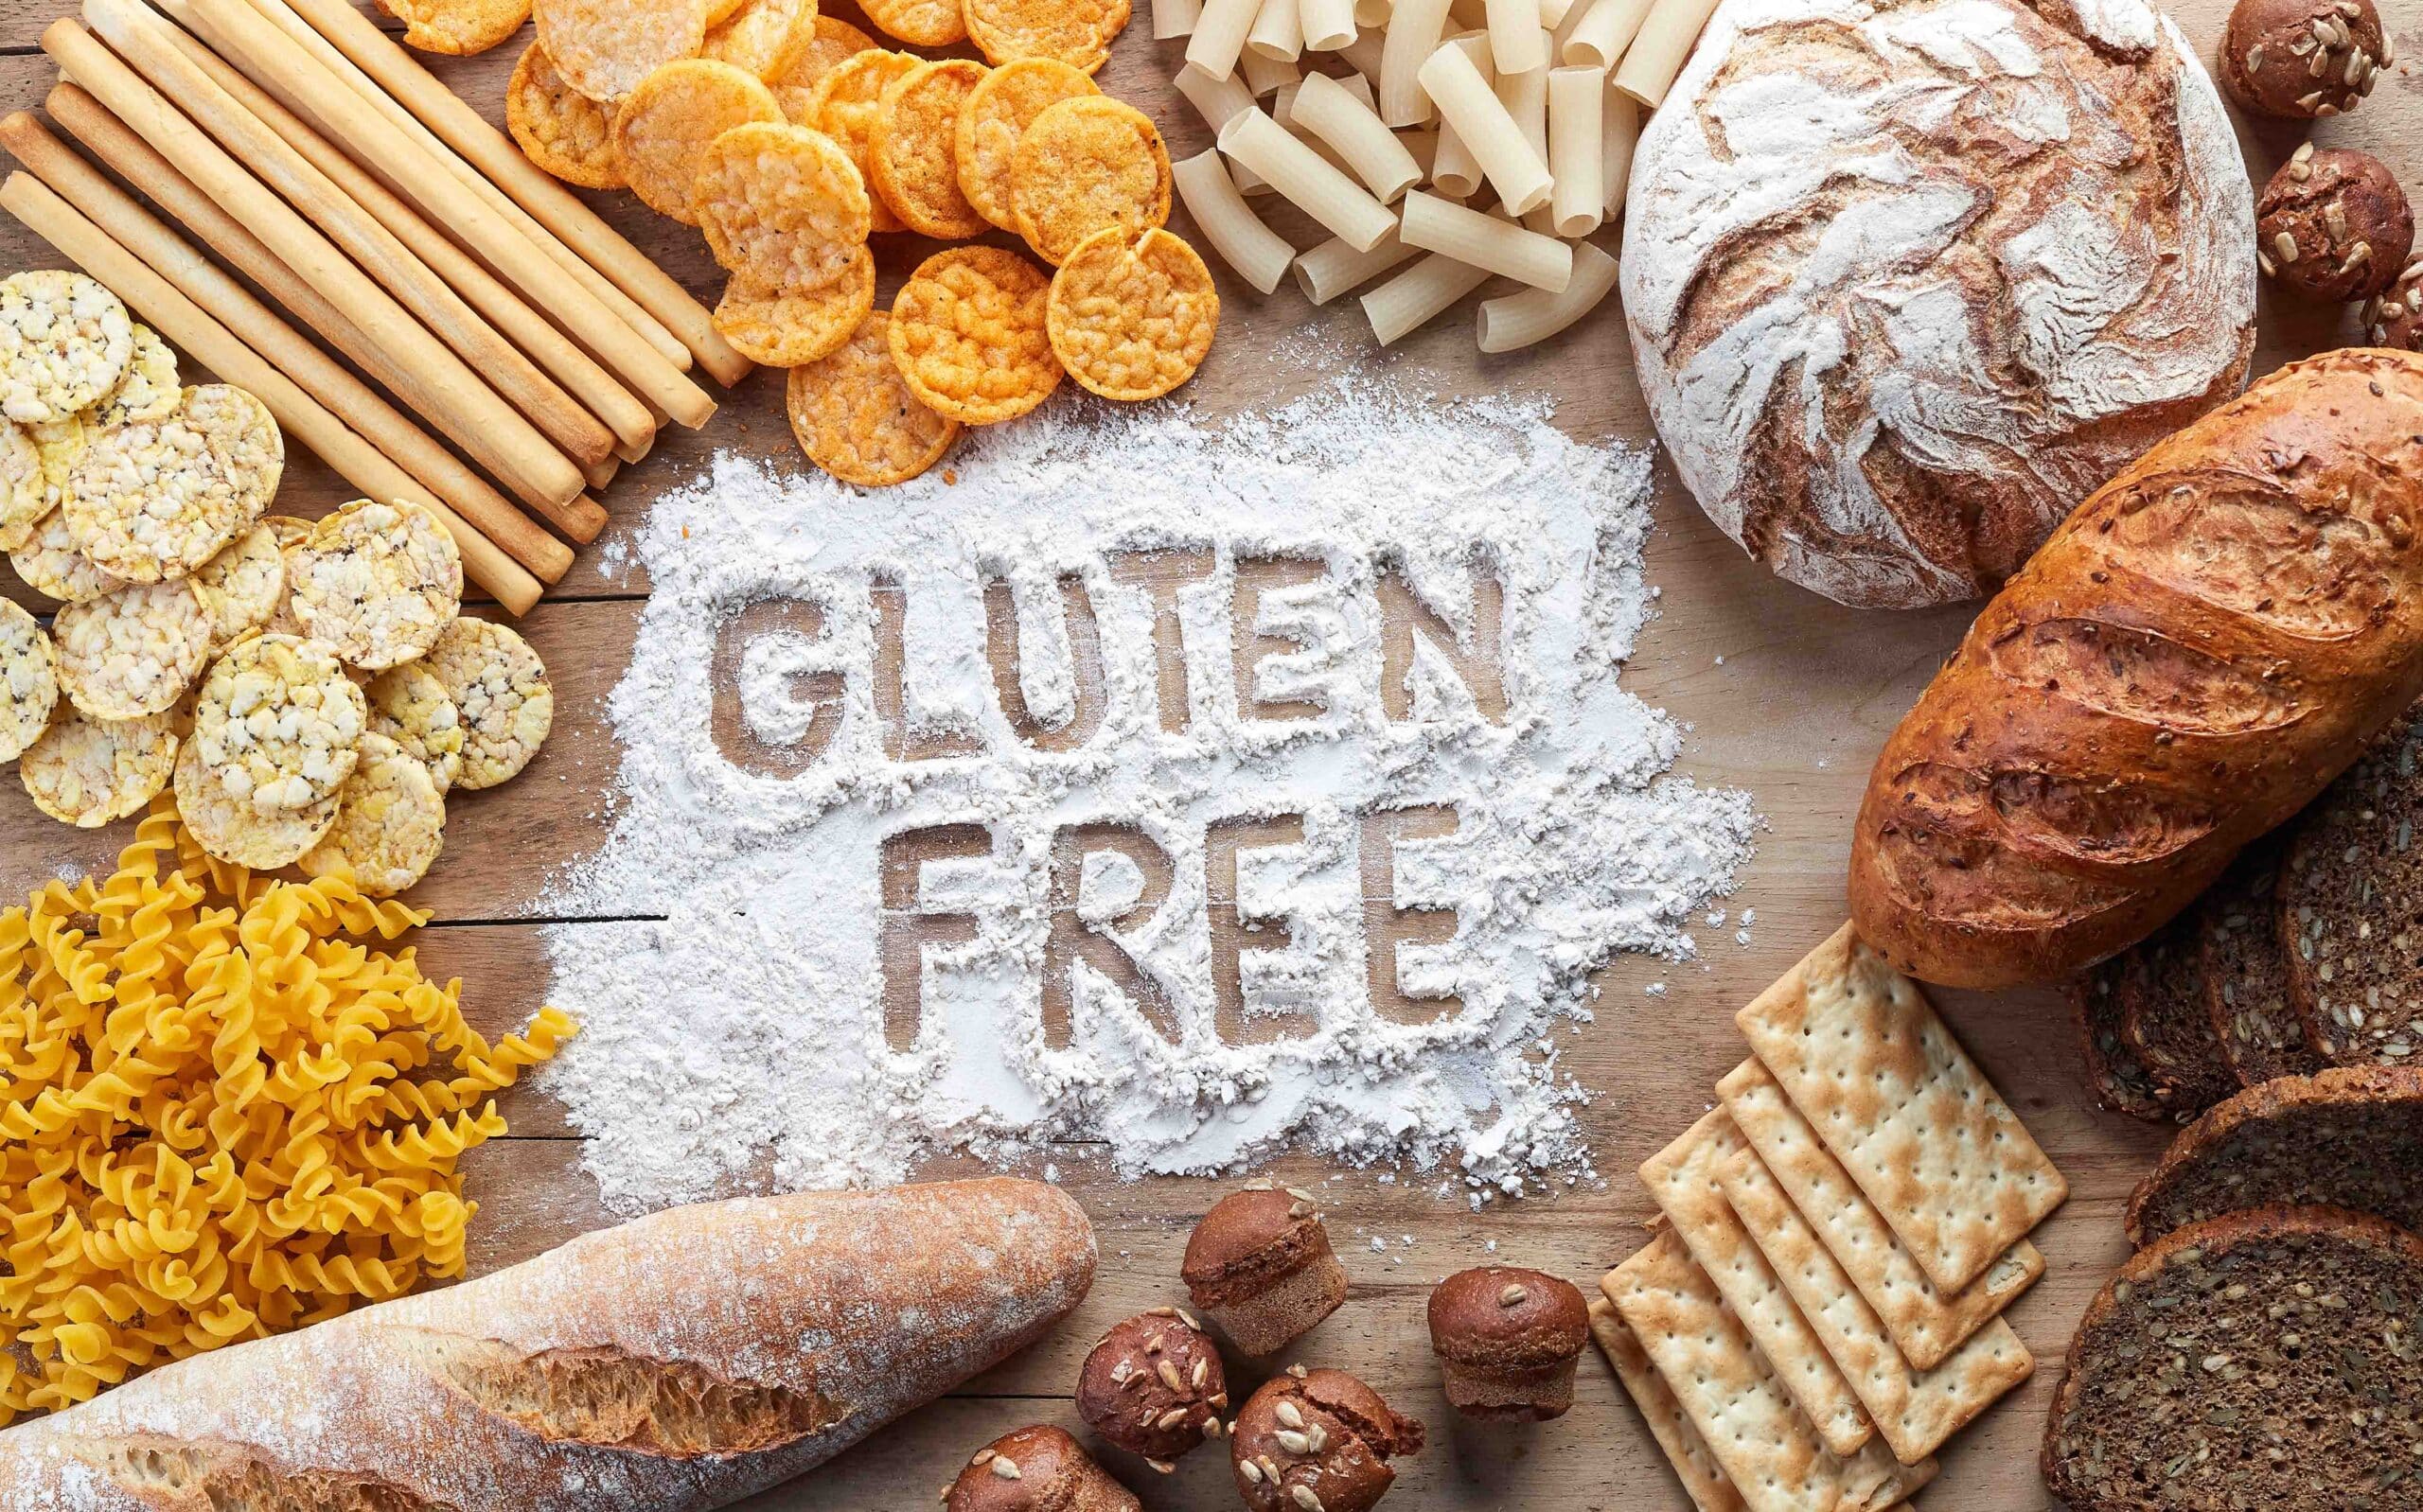 what-does-gluten-free-mean